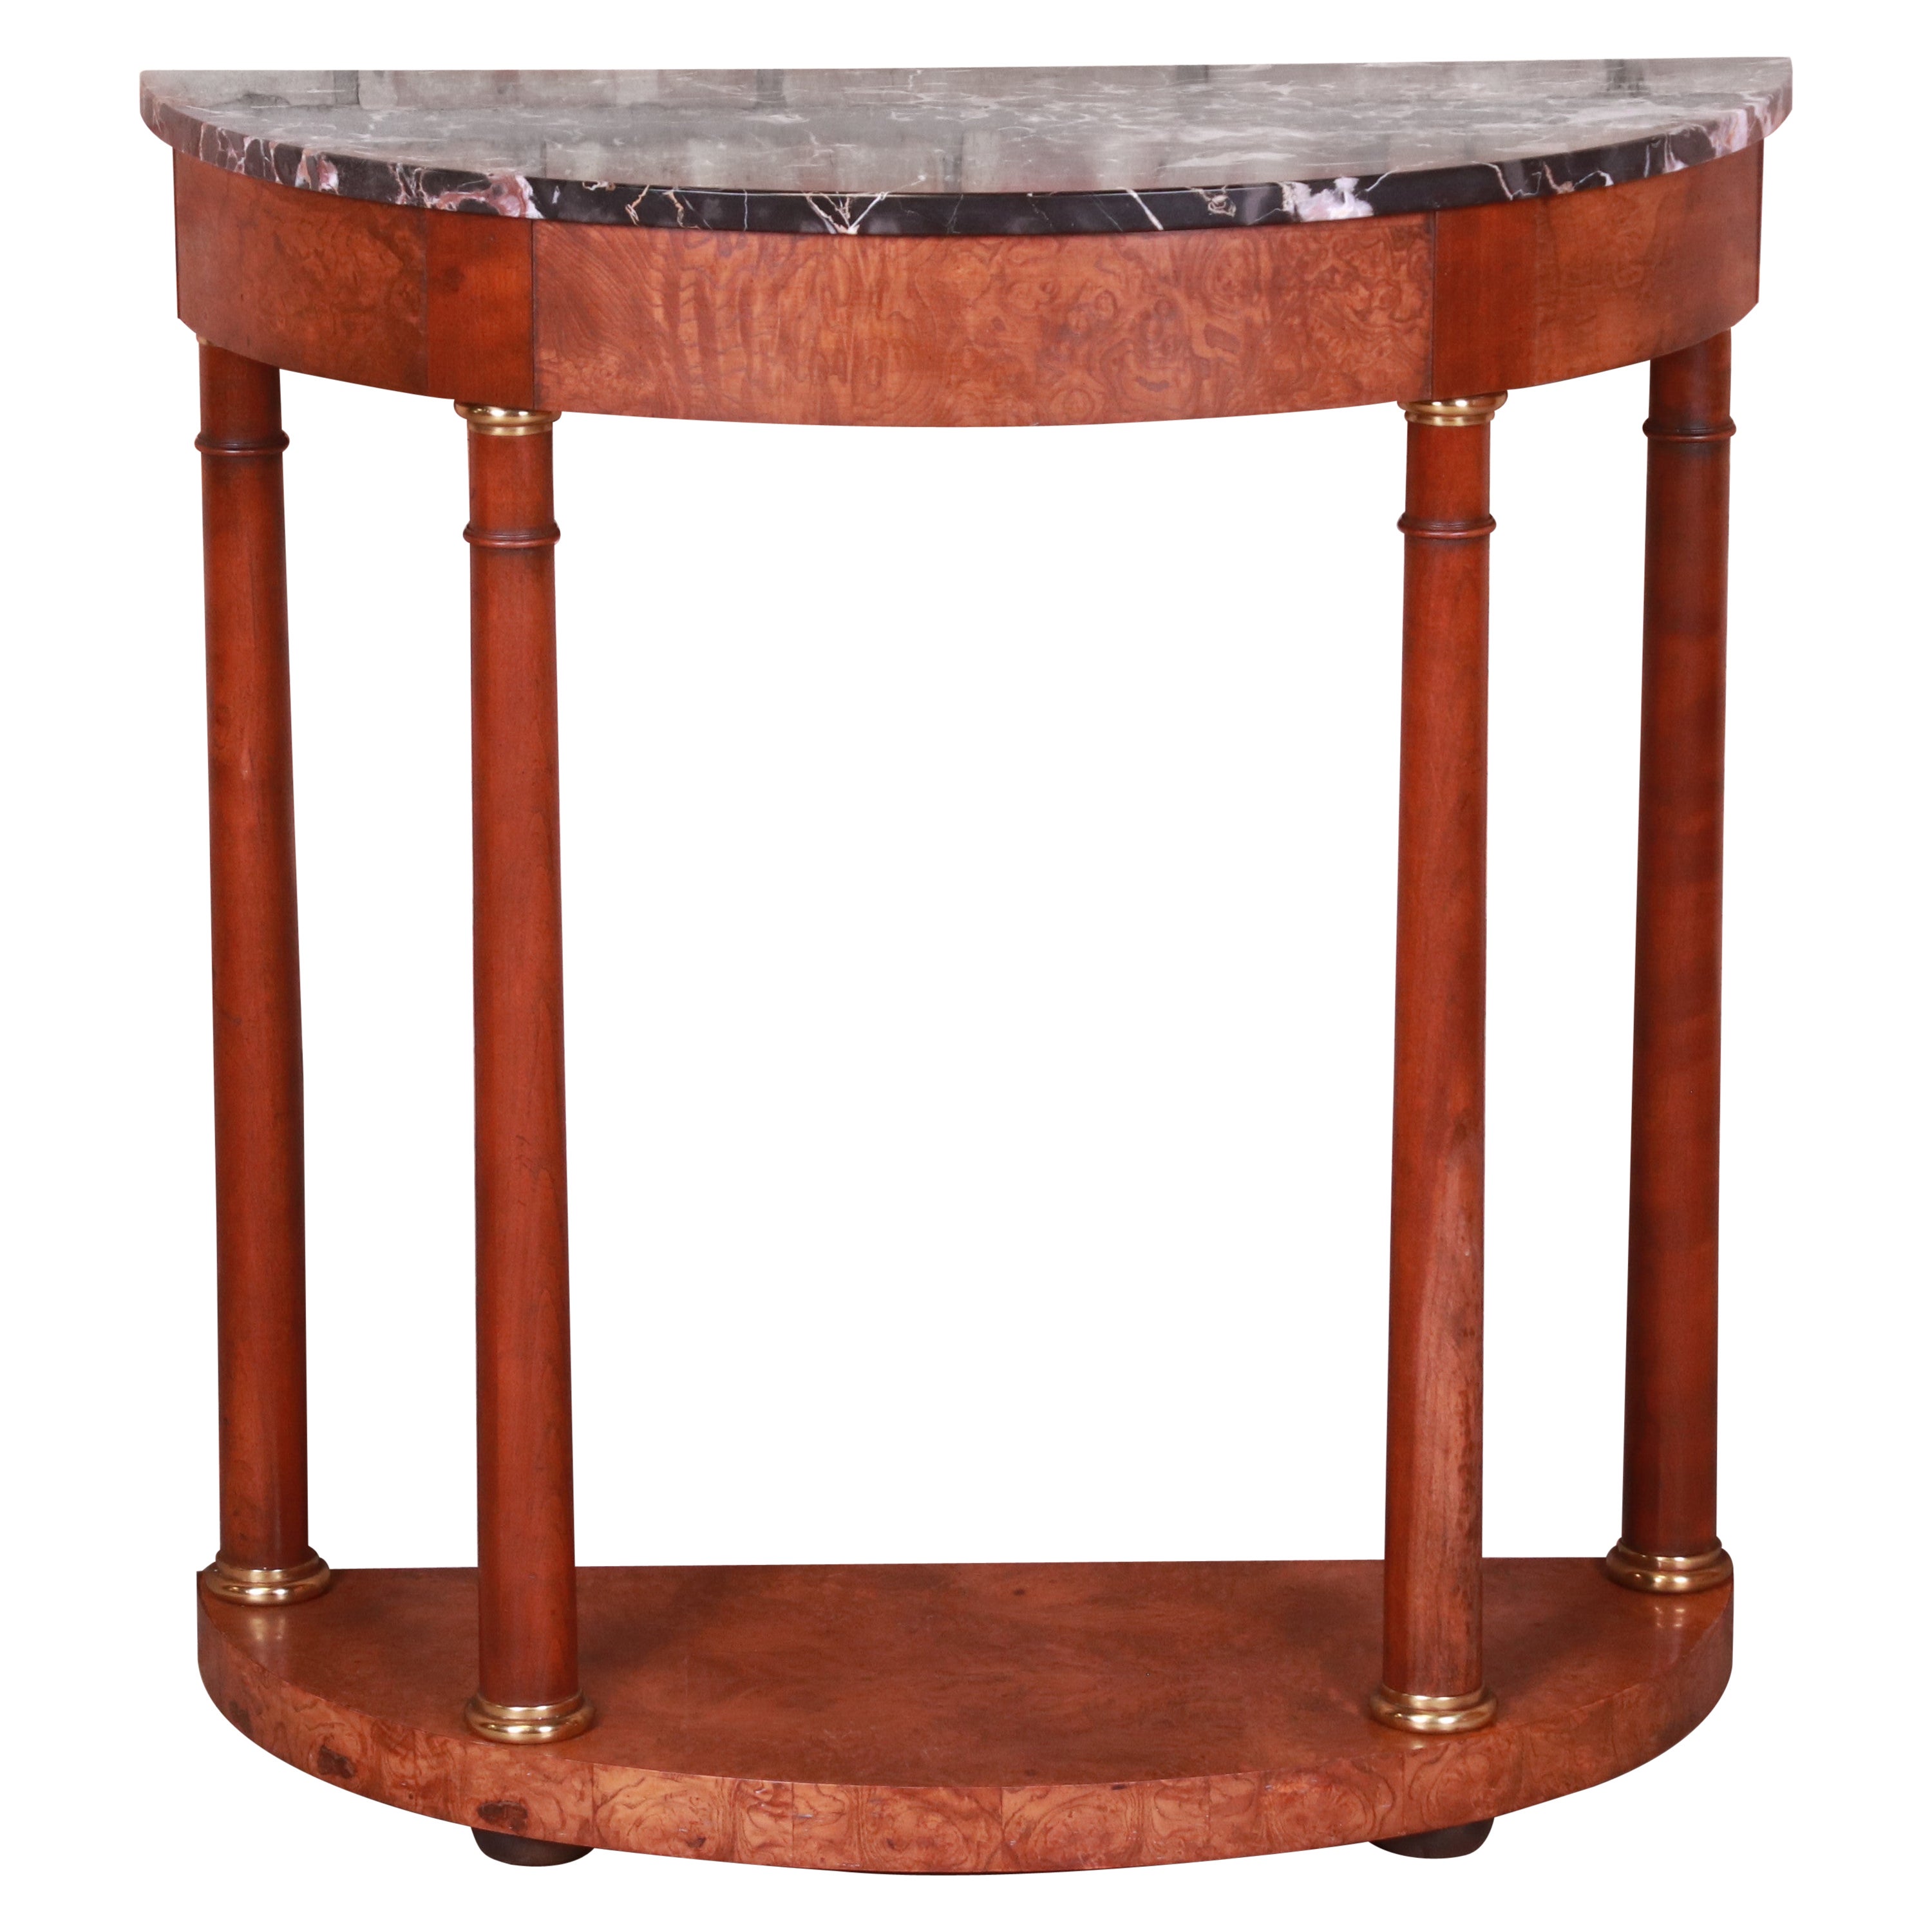 Baker Furniture Empire Burl Wood Marble Top Demilune Console Table